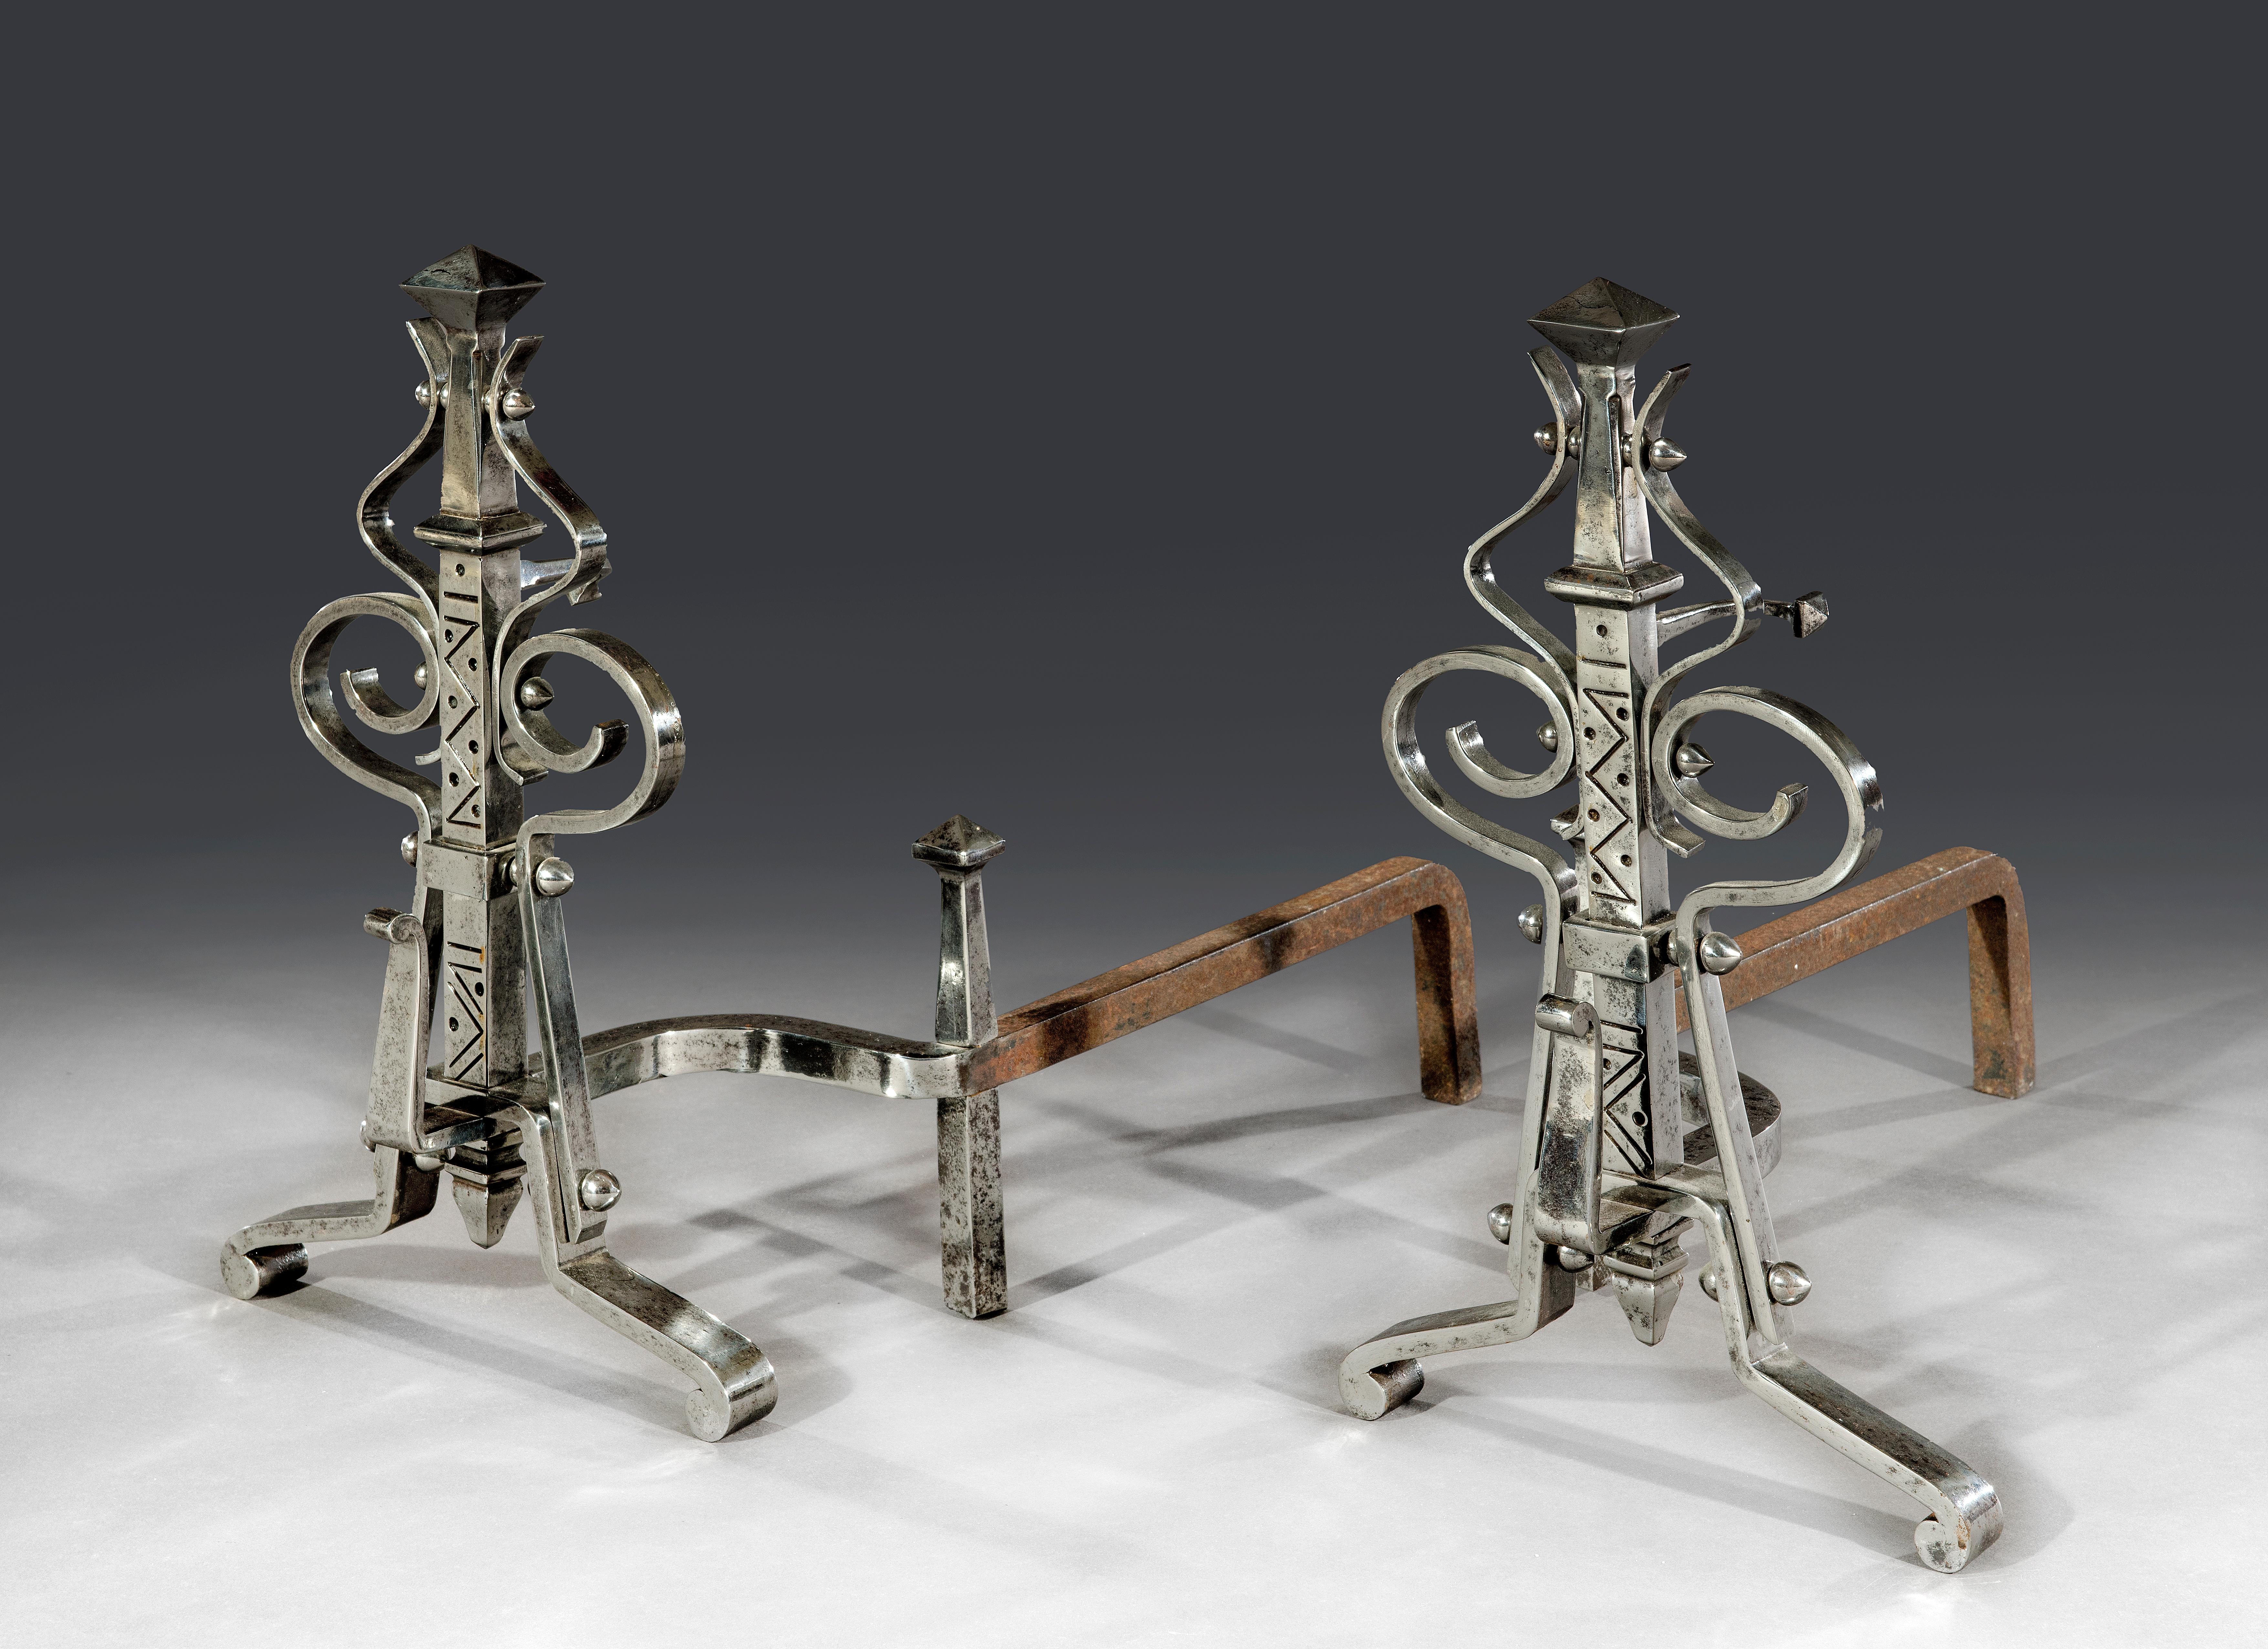 The polished steel andirons have fine 'punching' and wrought-work through-out.